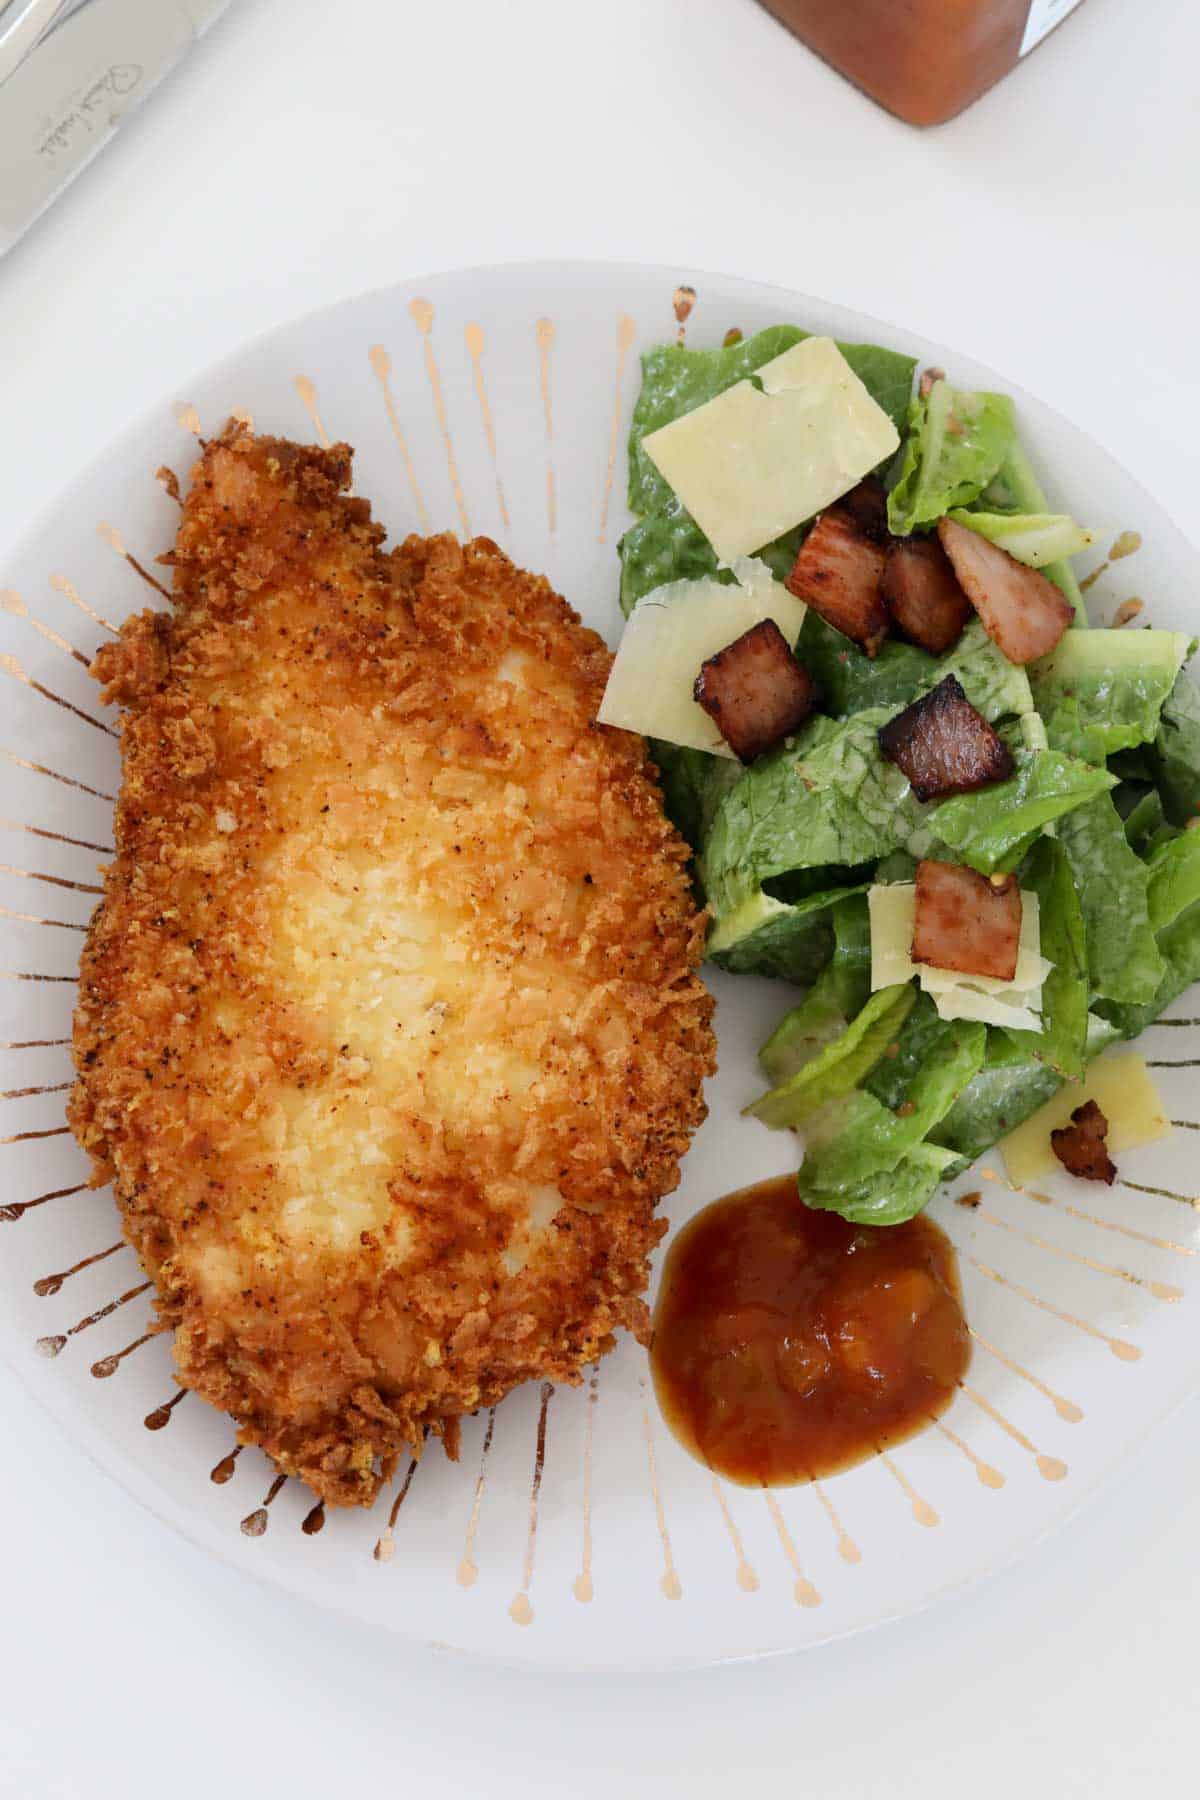 A crispy schnitzel on a plate with a caesar salad.